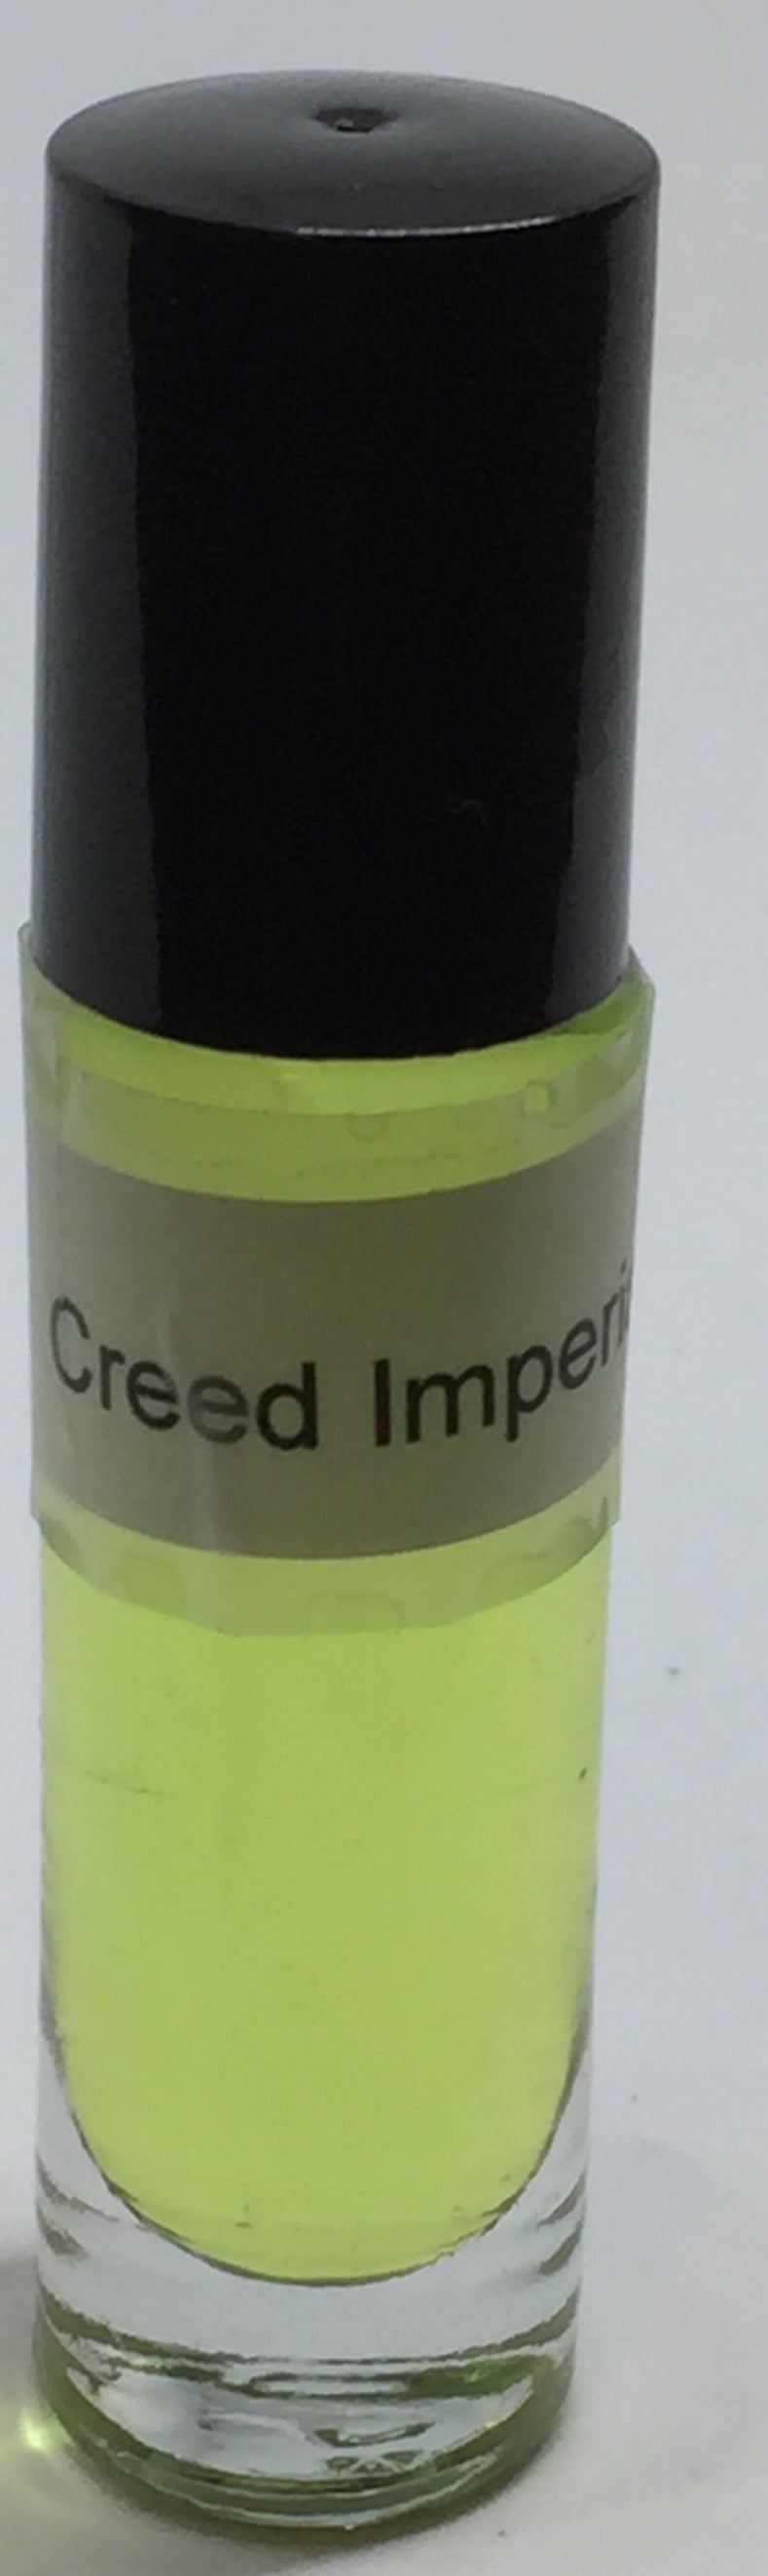 Creed Imperial Type: Fragrance(Perfume)Body Oil Men